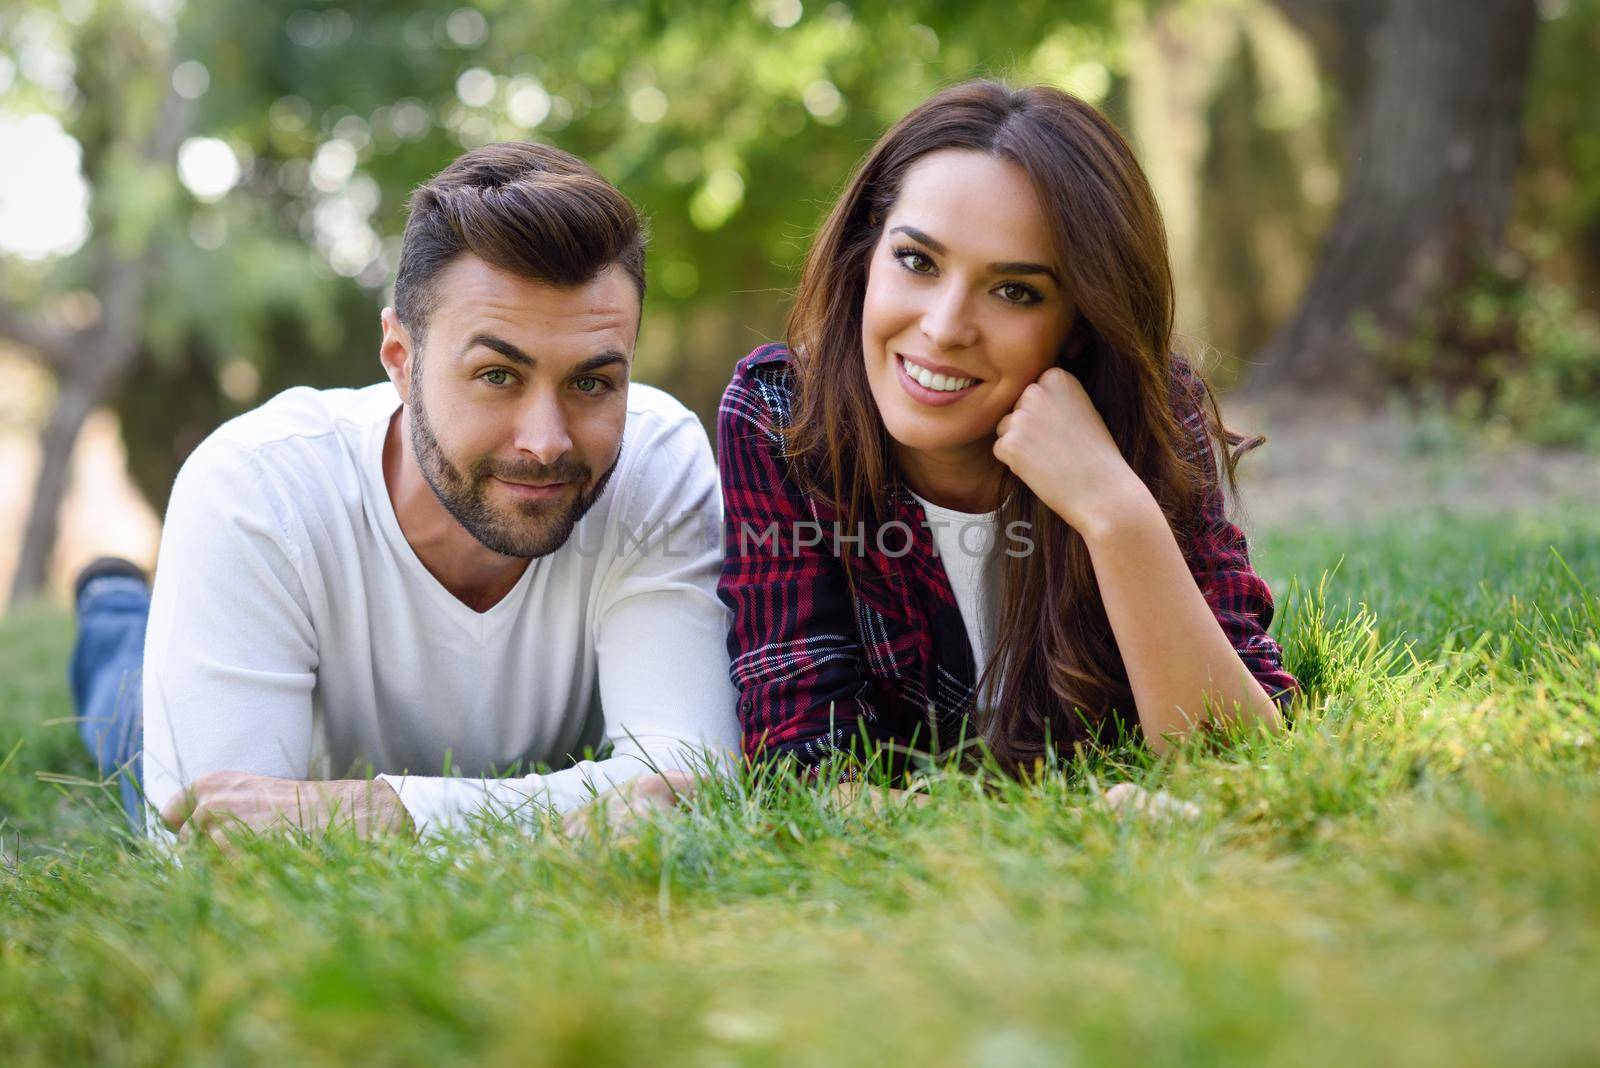 Beautiful young couple laying on grass in an urban park. Caucasian man and woman wearing casual clothes.